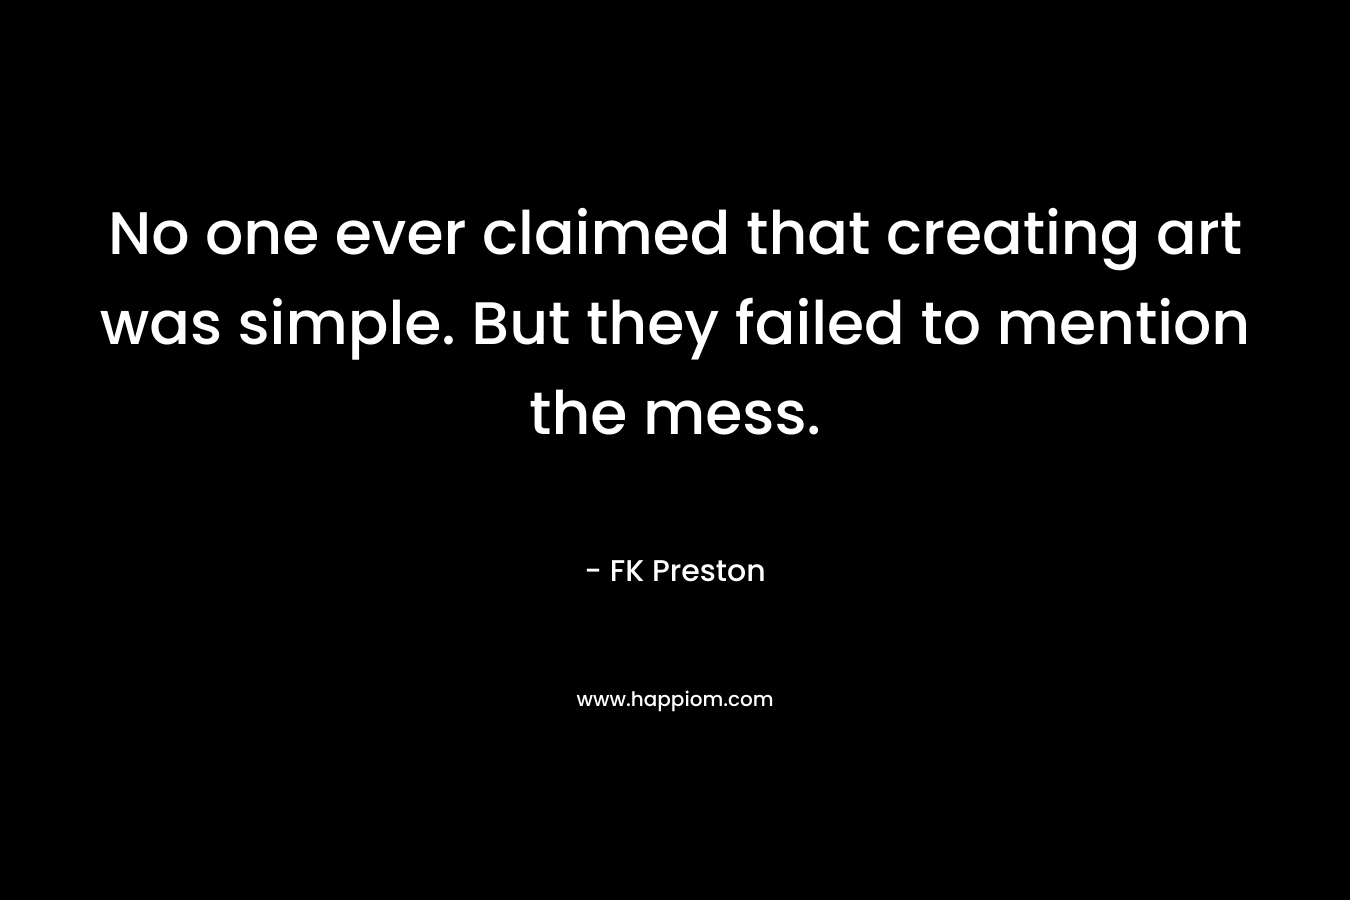 No one ever claimed that creating art was simple. But they failed to mention the mess. – FK Preston